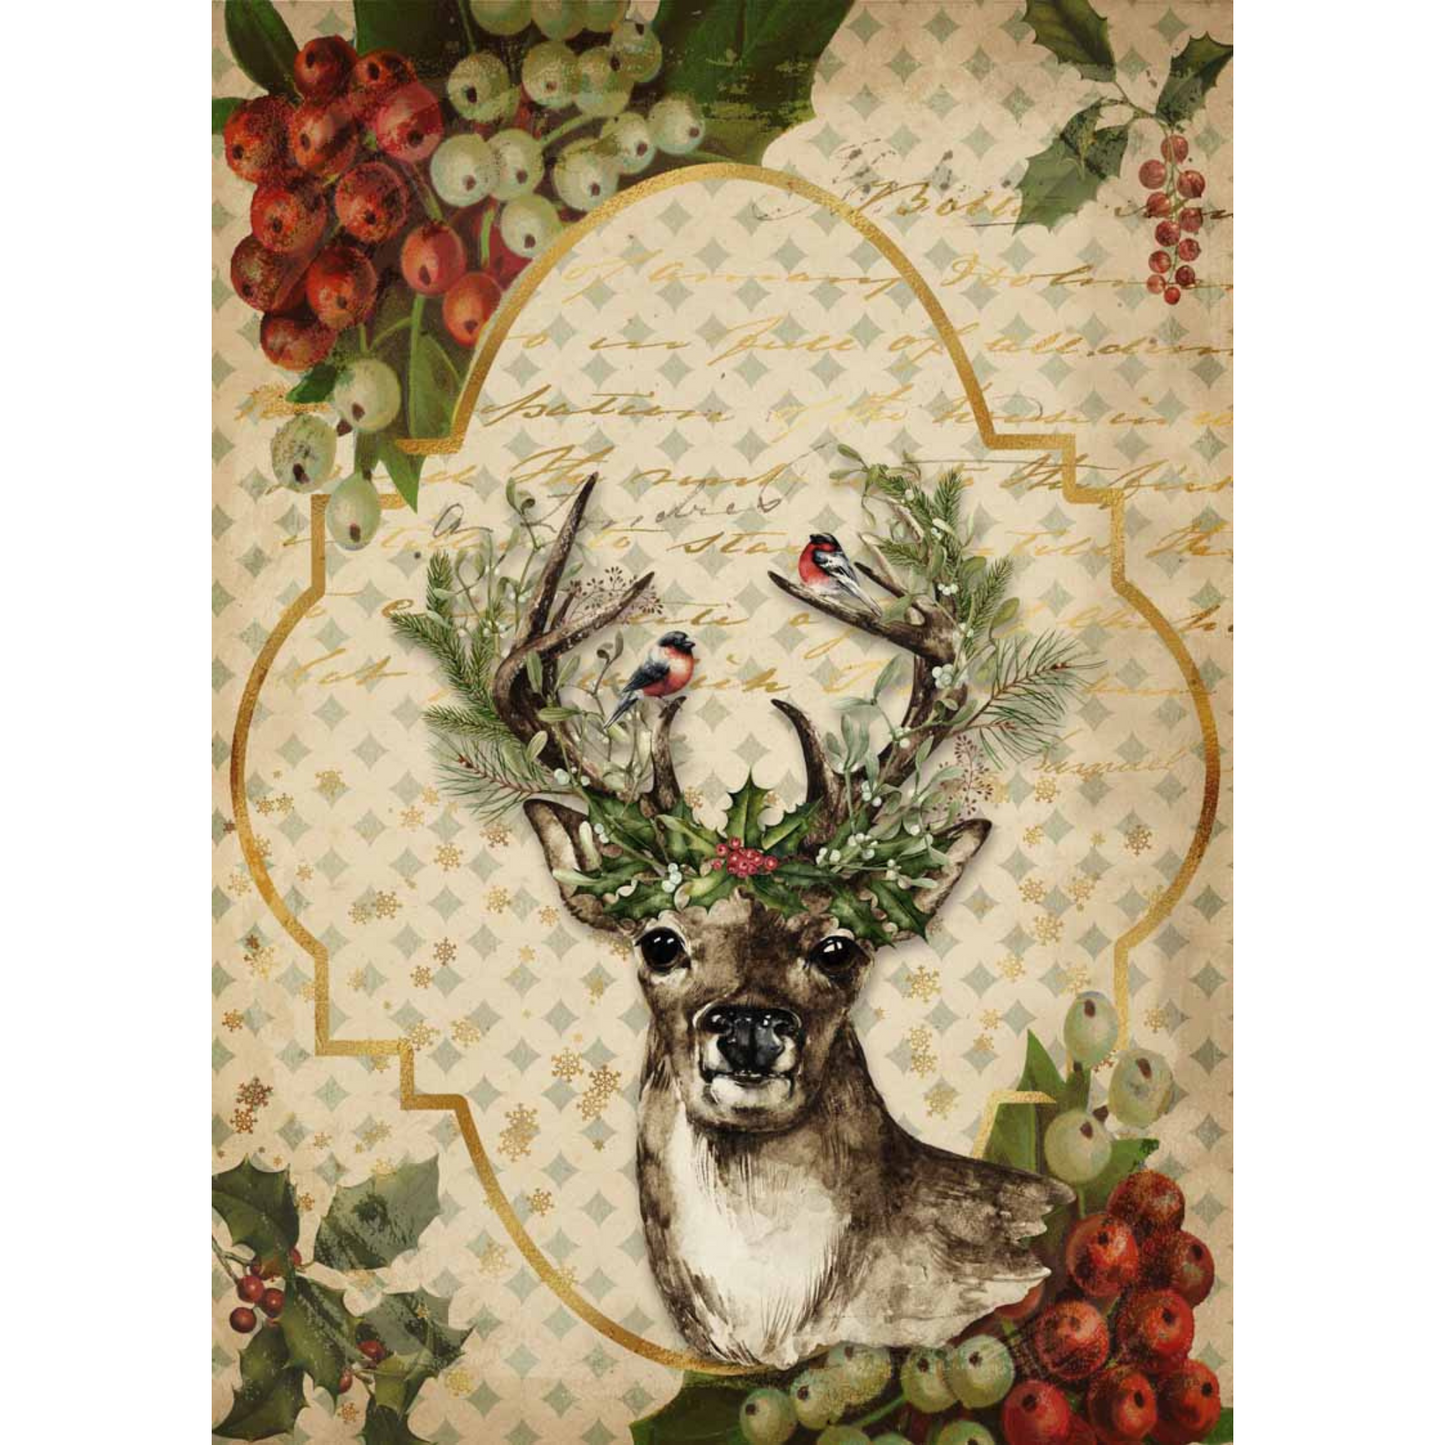 "Christmas Reindeer" Decoupage Rice Paper by Decoupage Queen. Available at Milton's Daughter.